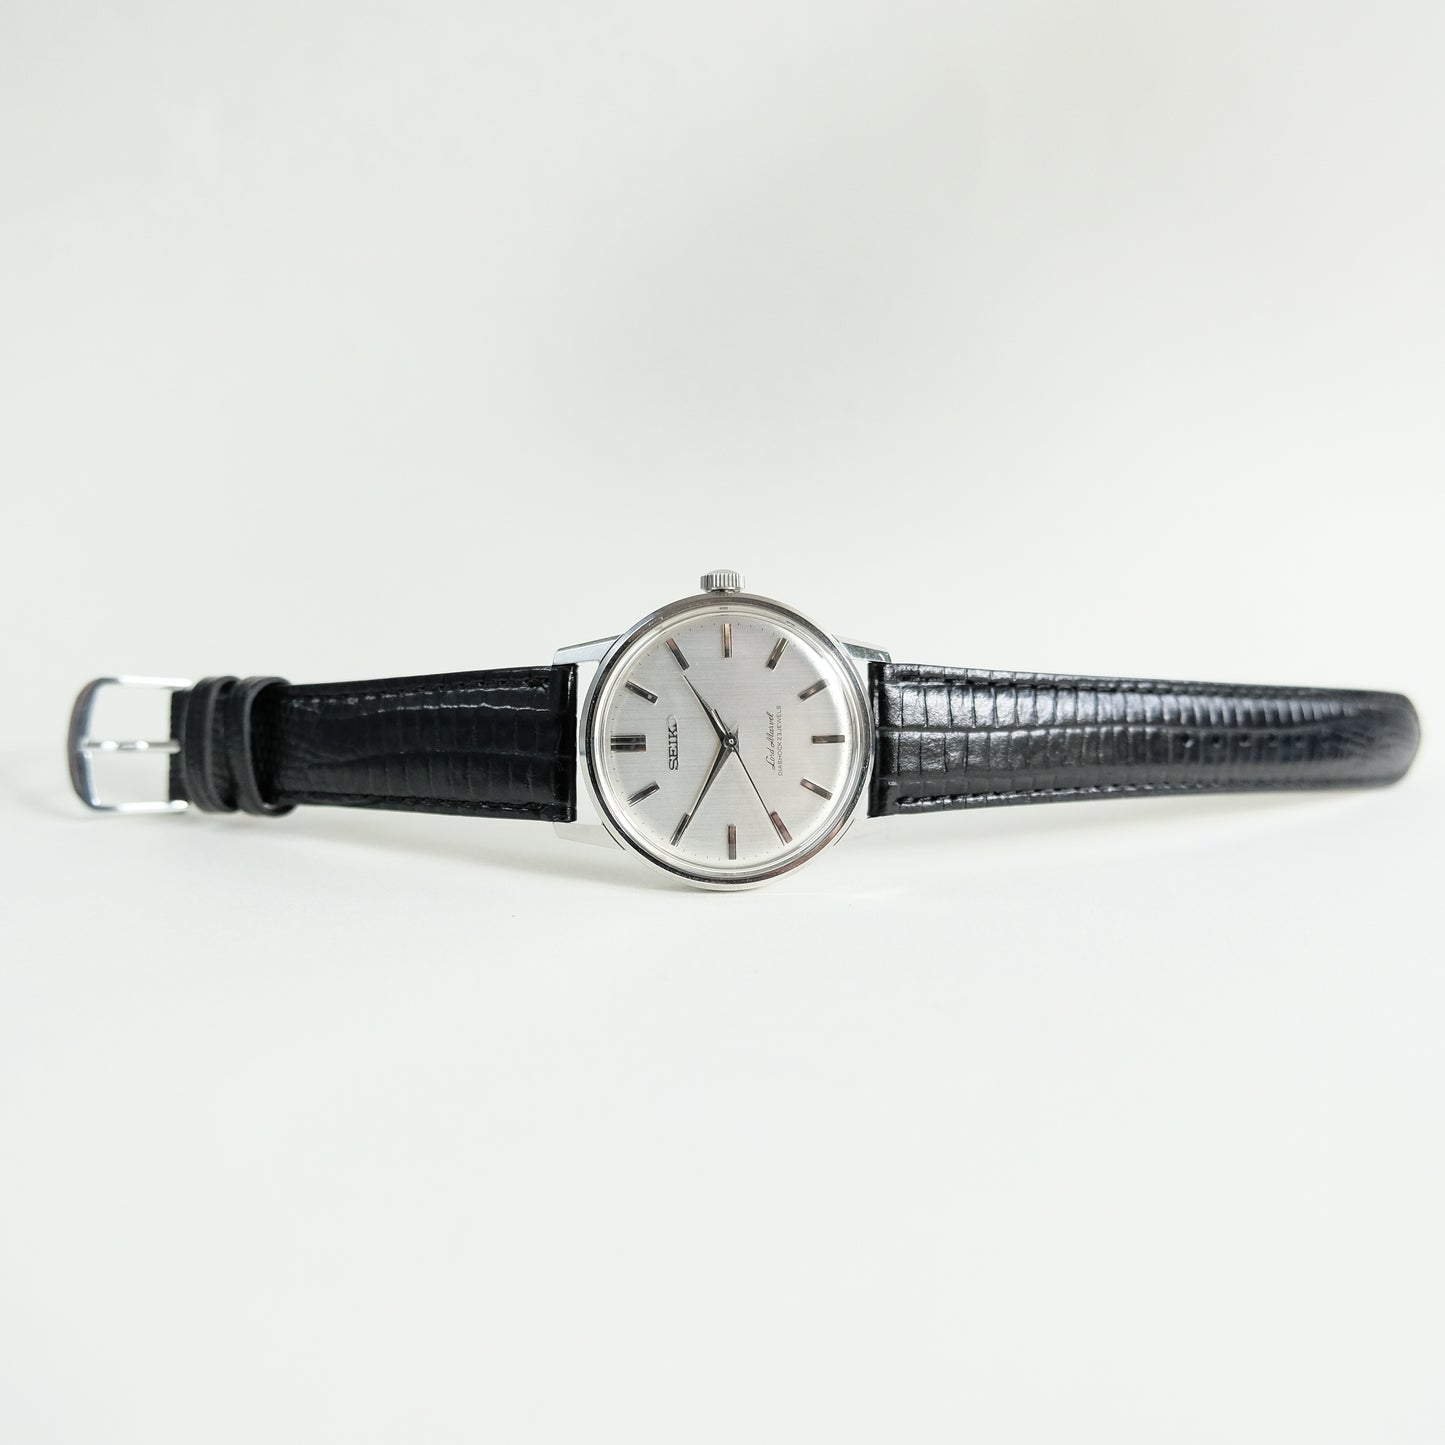 1965 Seiko Lord Marvel "Low Beat" 5740-0010